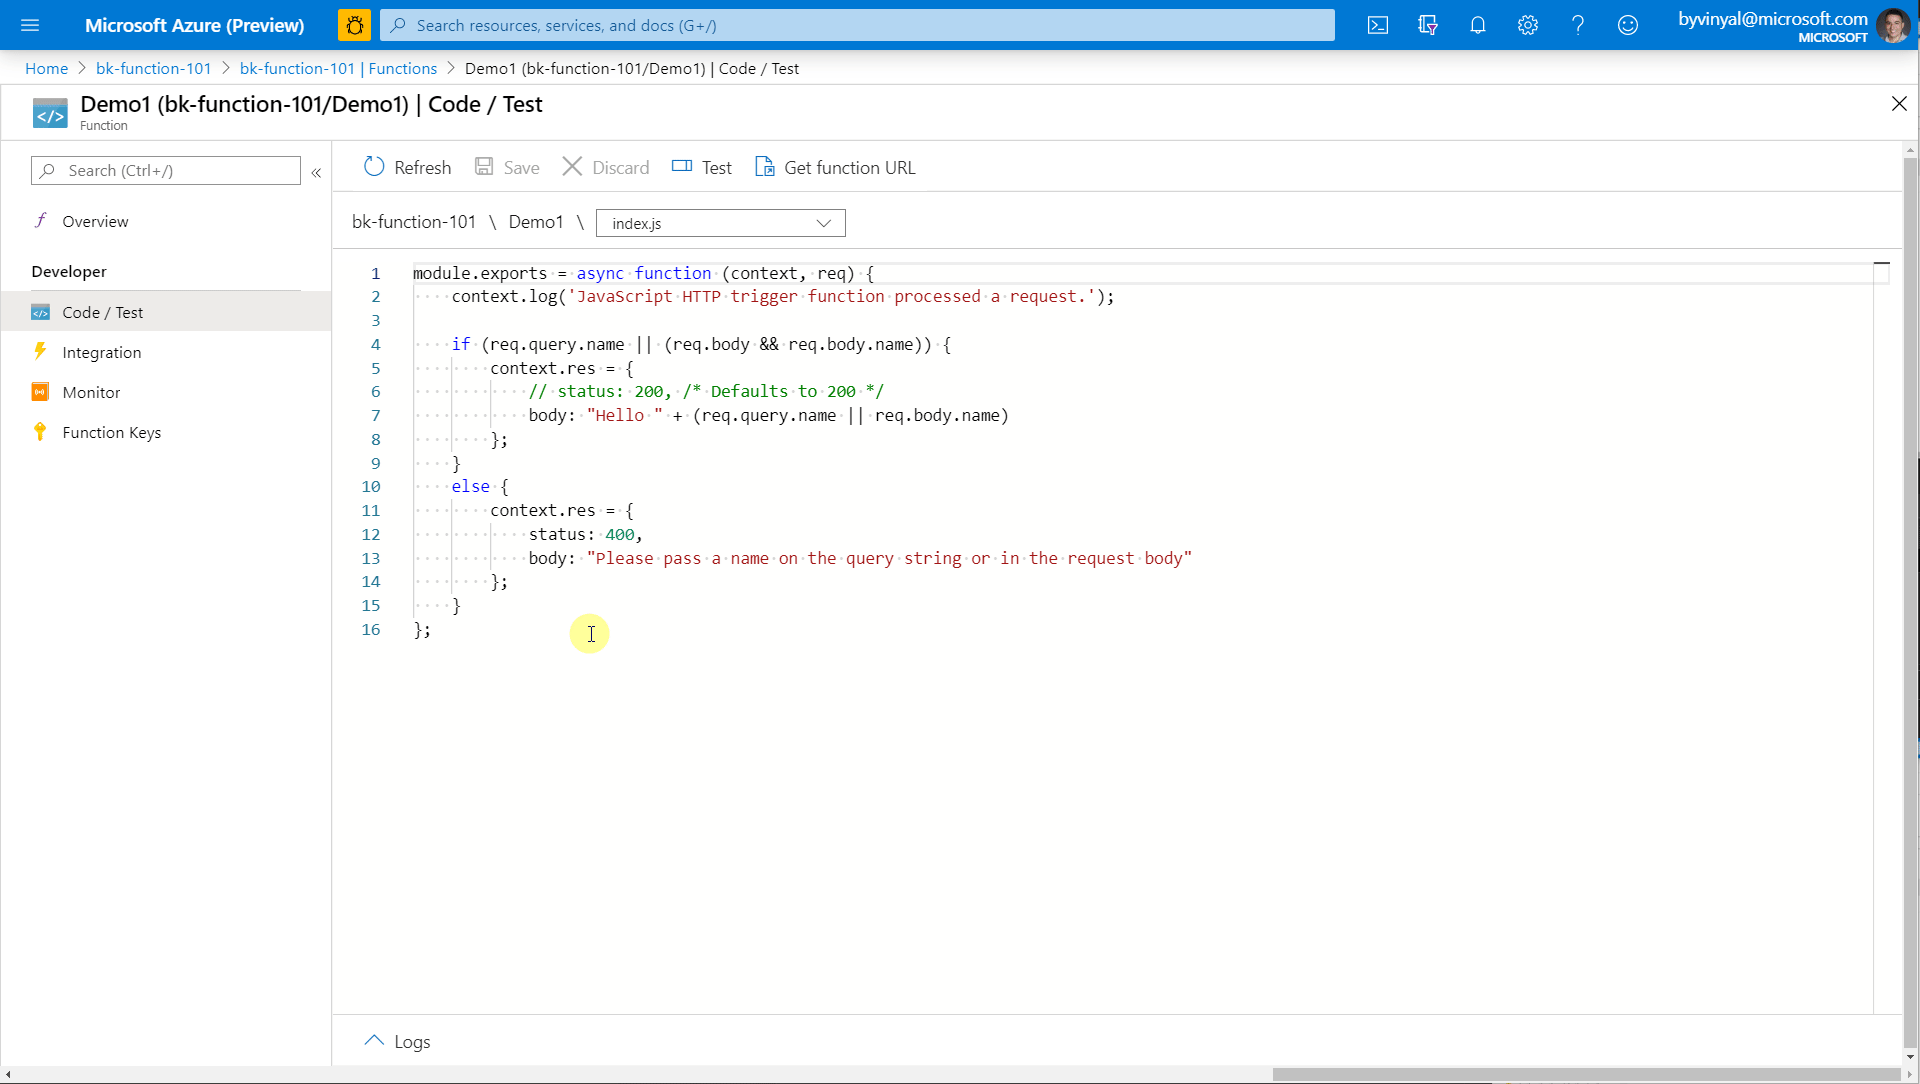 New functions code editor